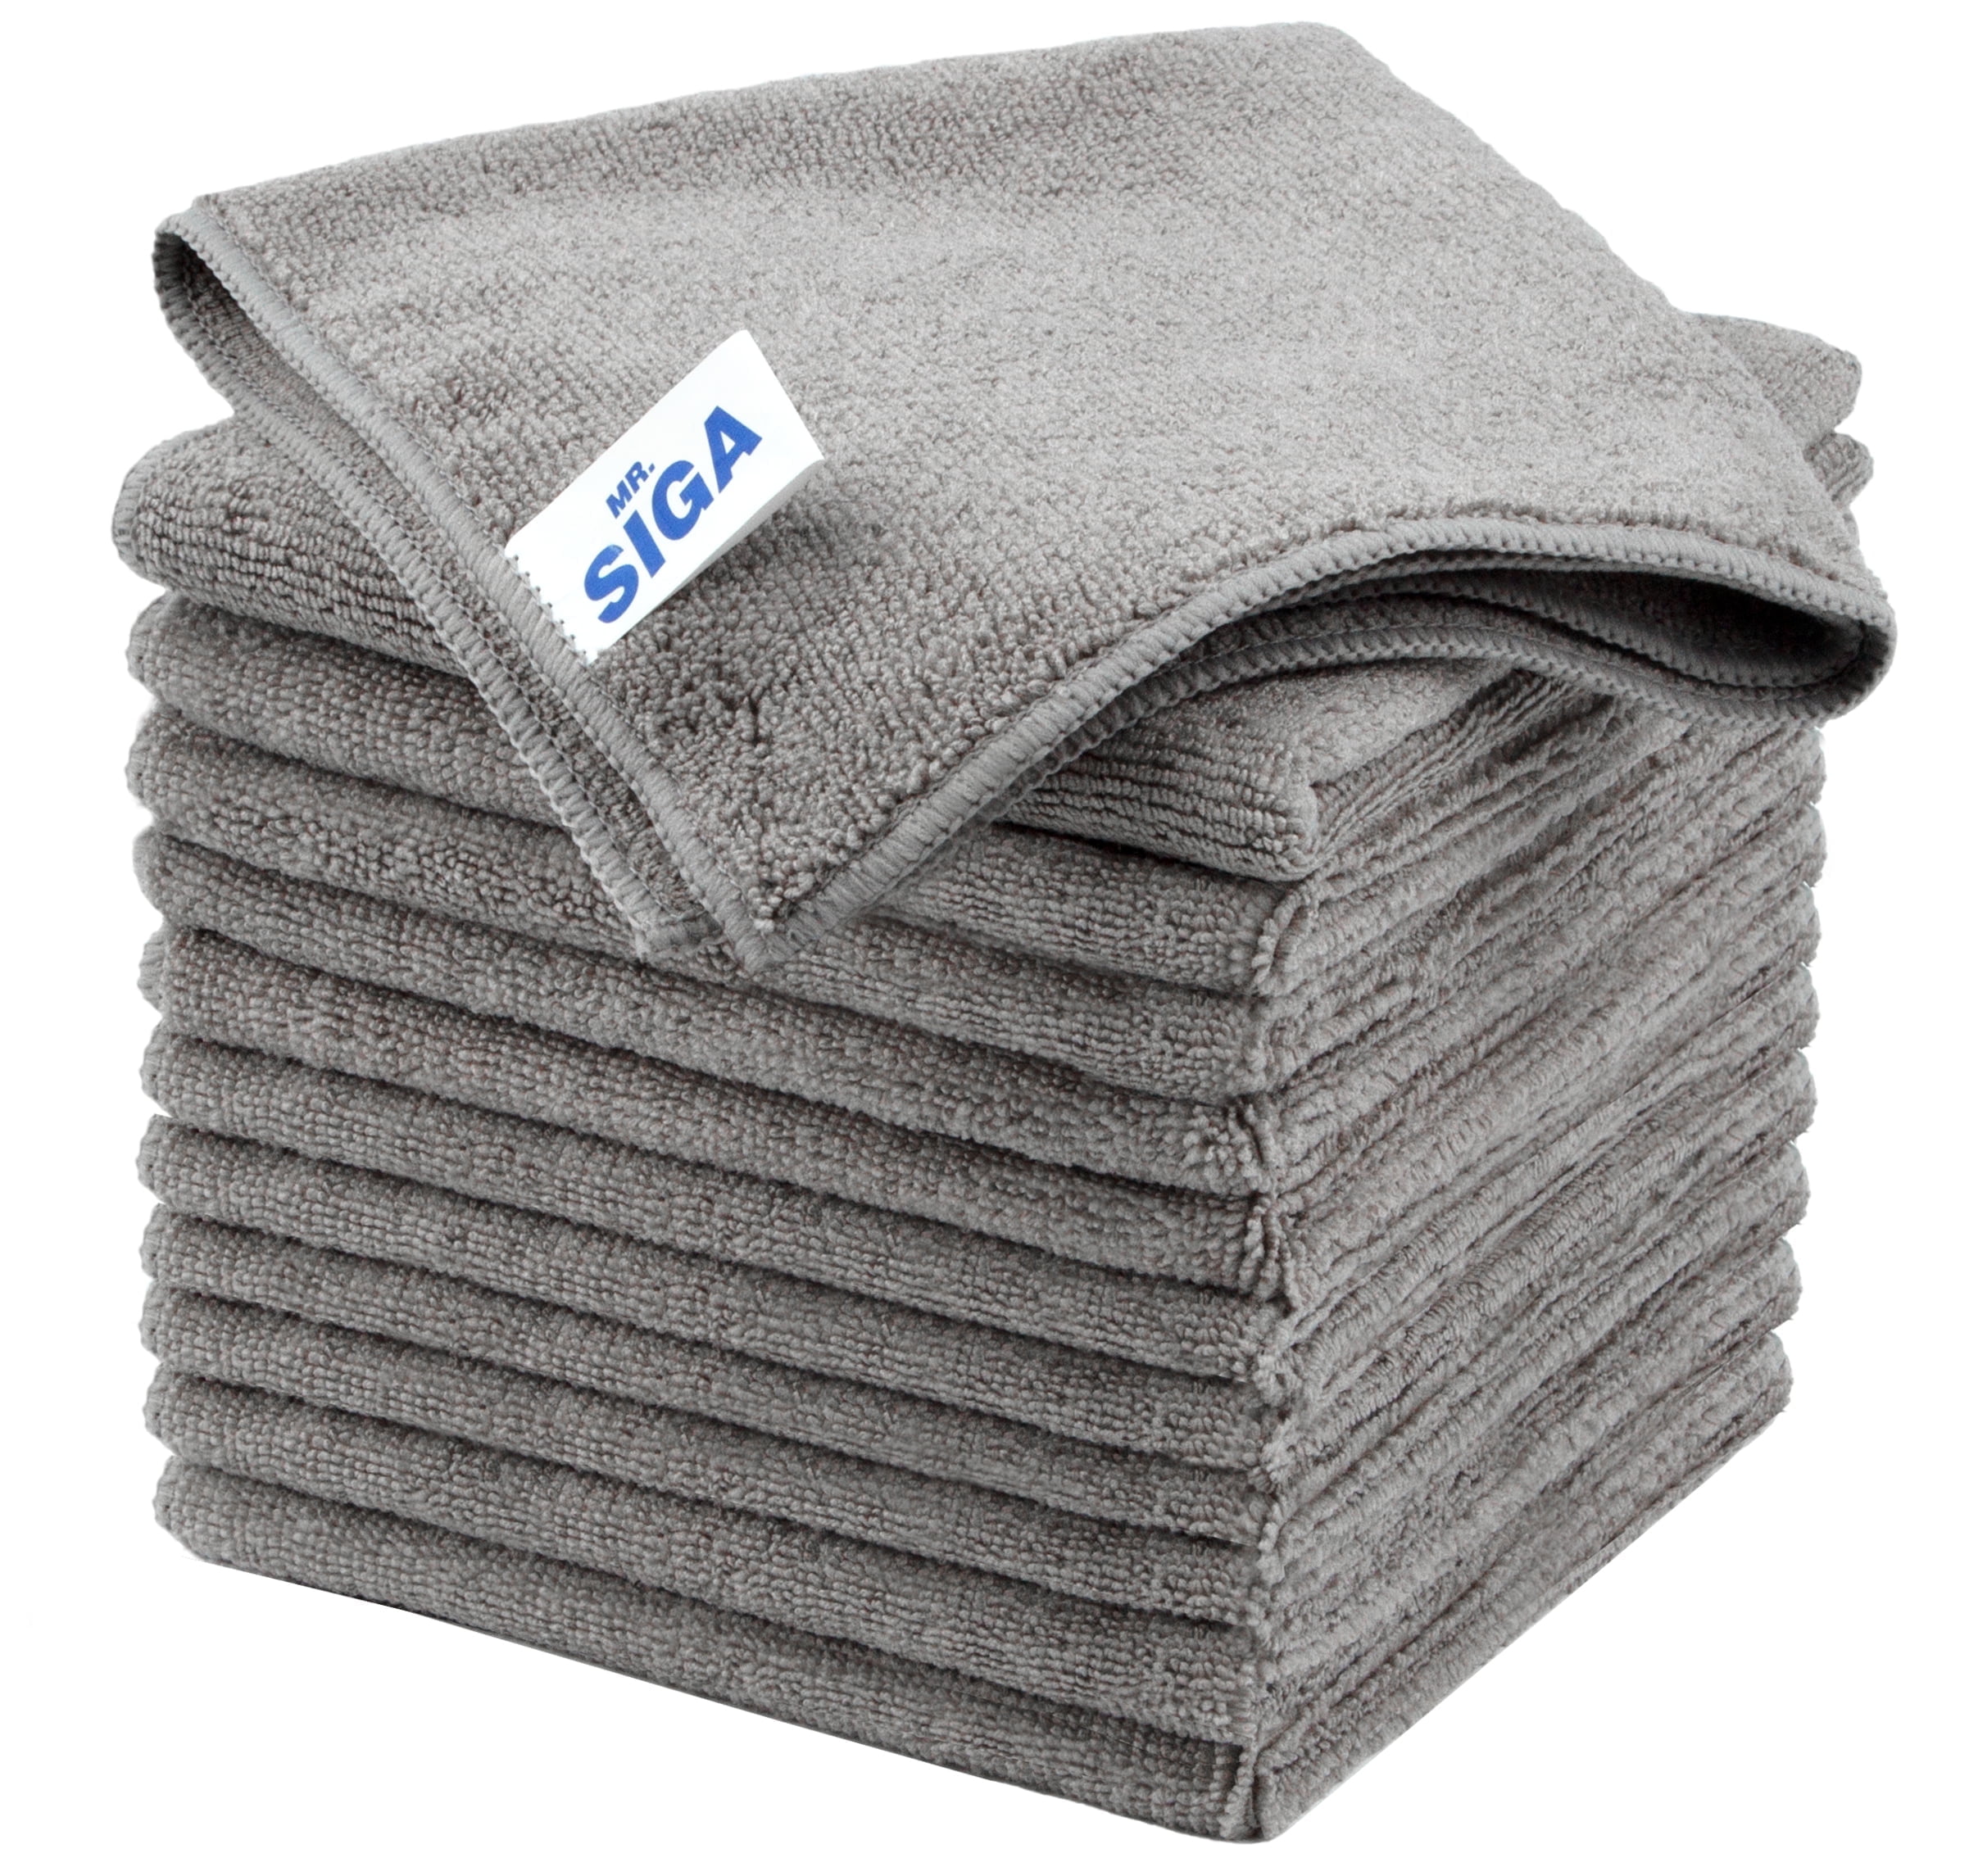 Microfiber Stainless Steel Cloth Grey at Whole Foods Market